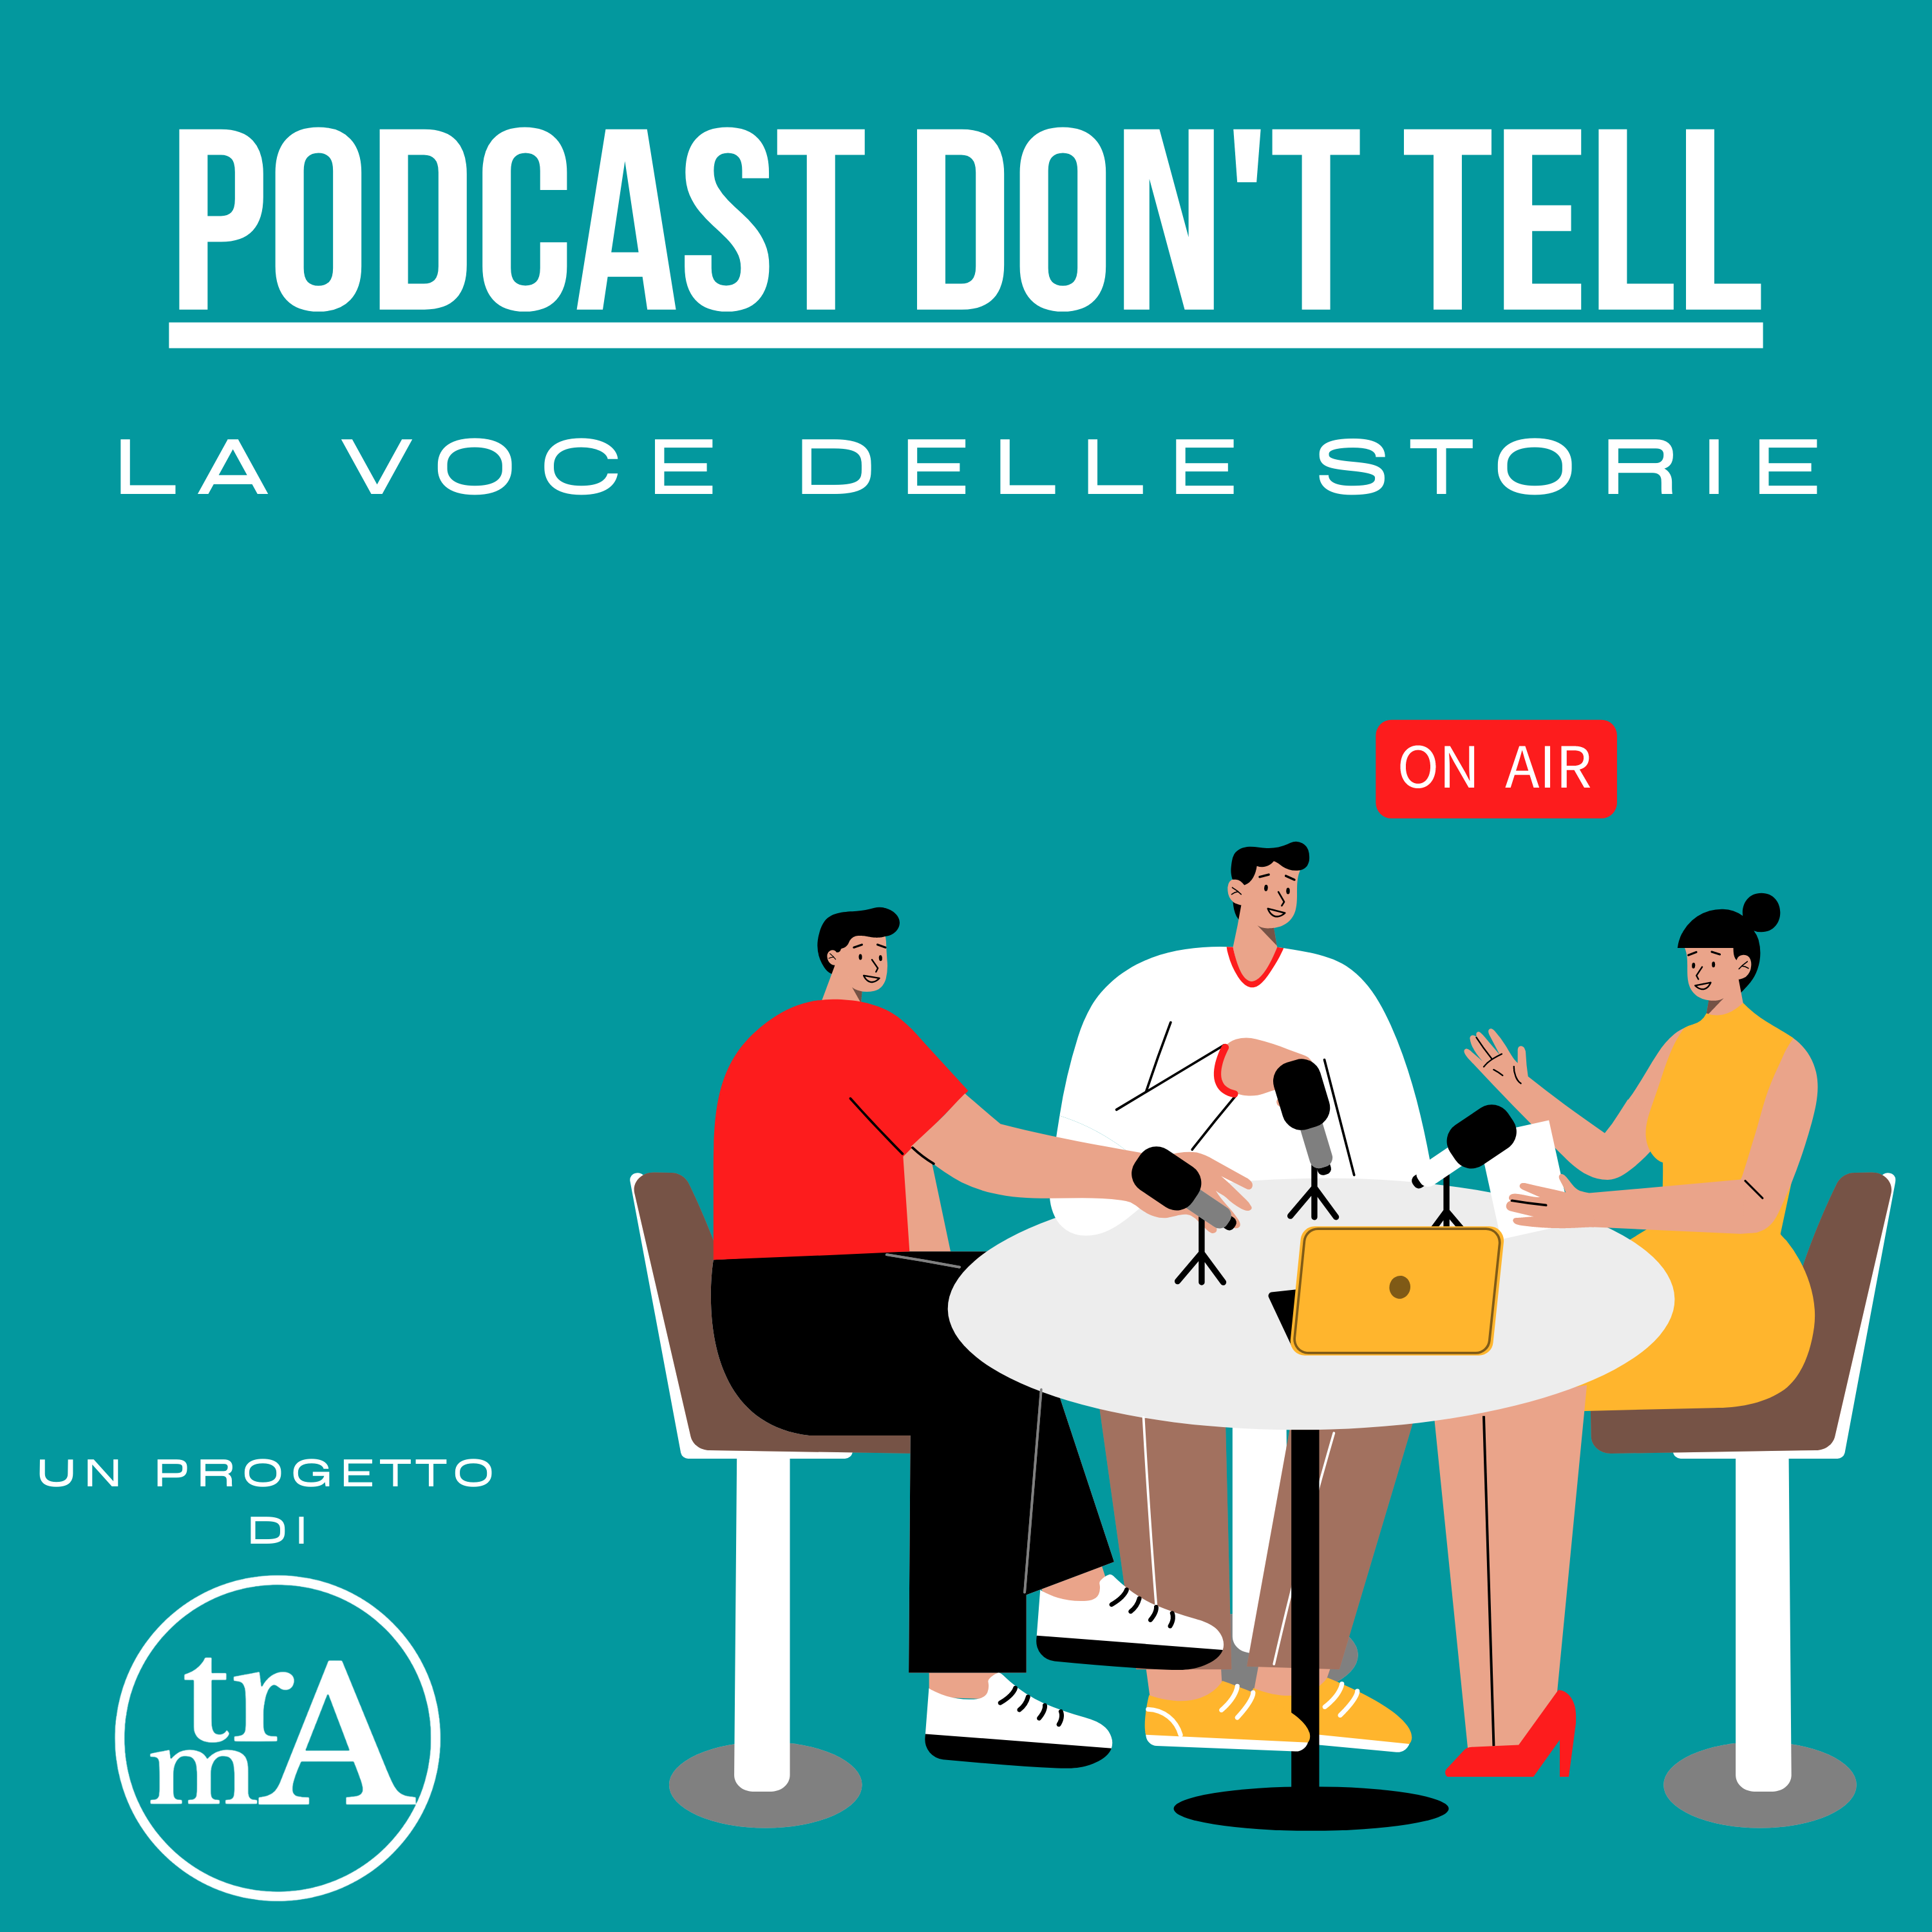 Podcast don't tell - LIVE